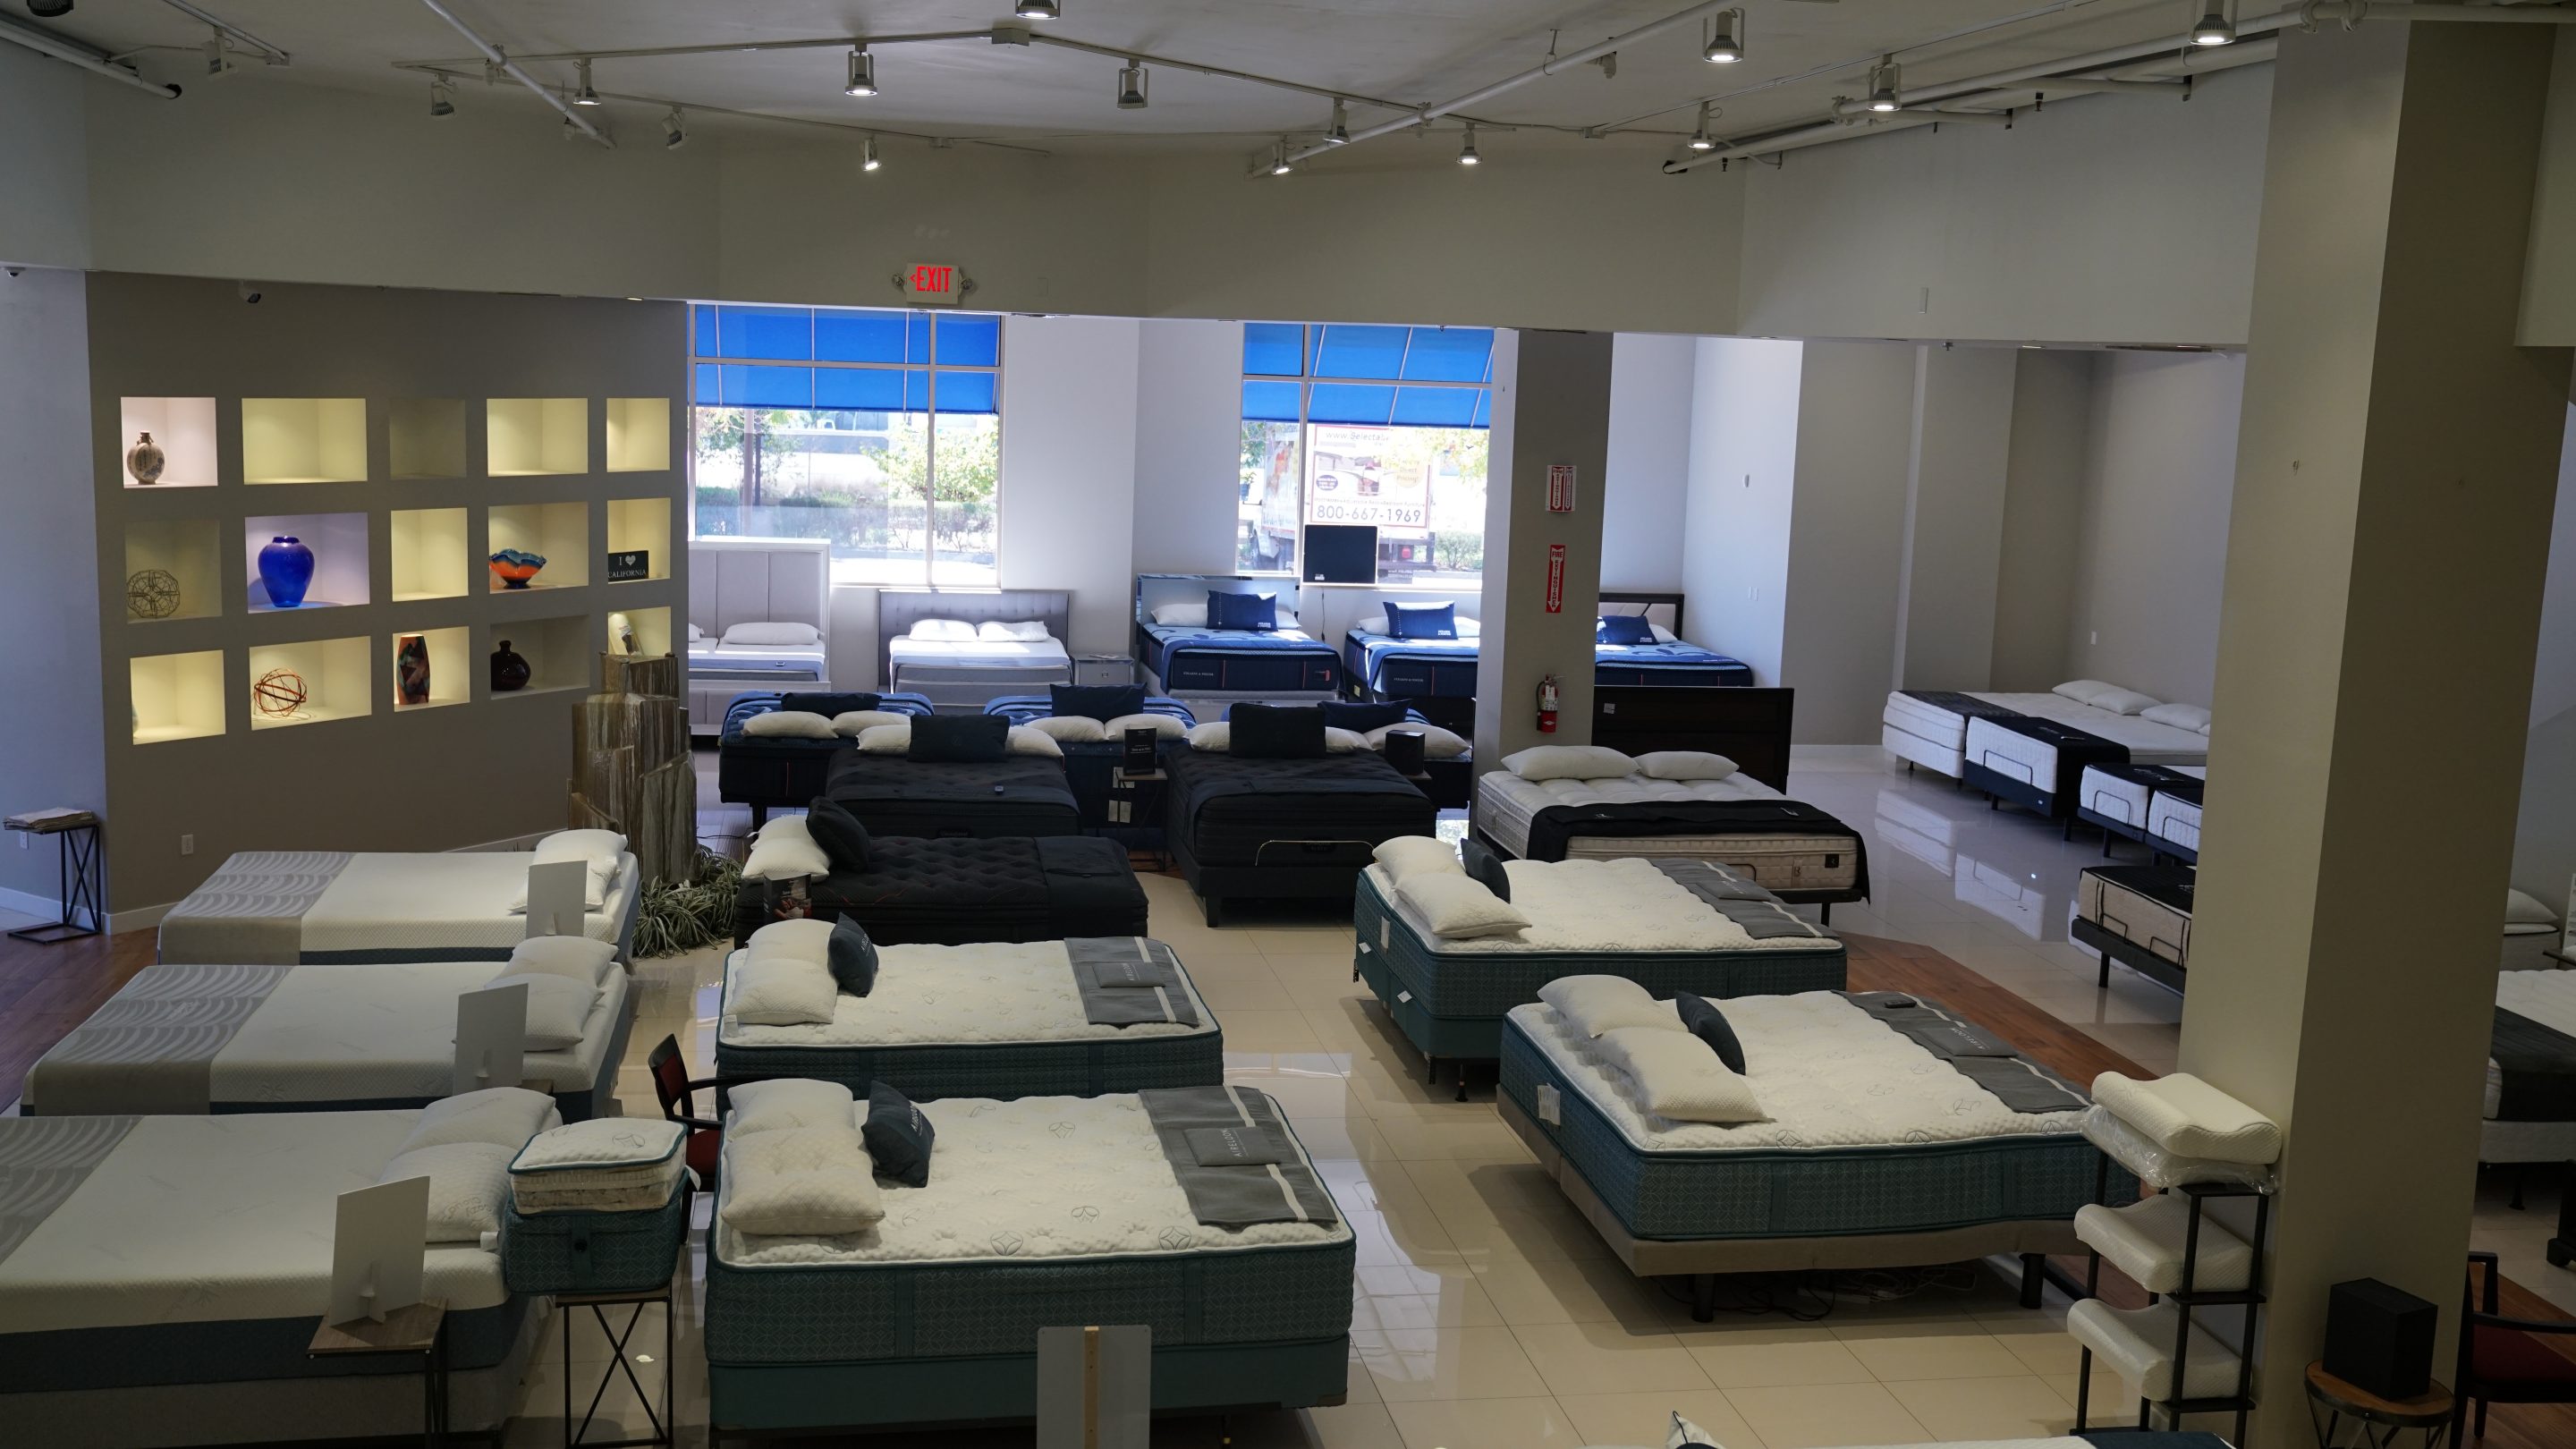 Ultrabed In Agoura Hills Showroom